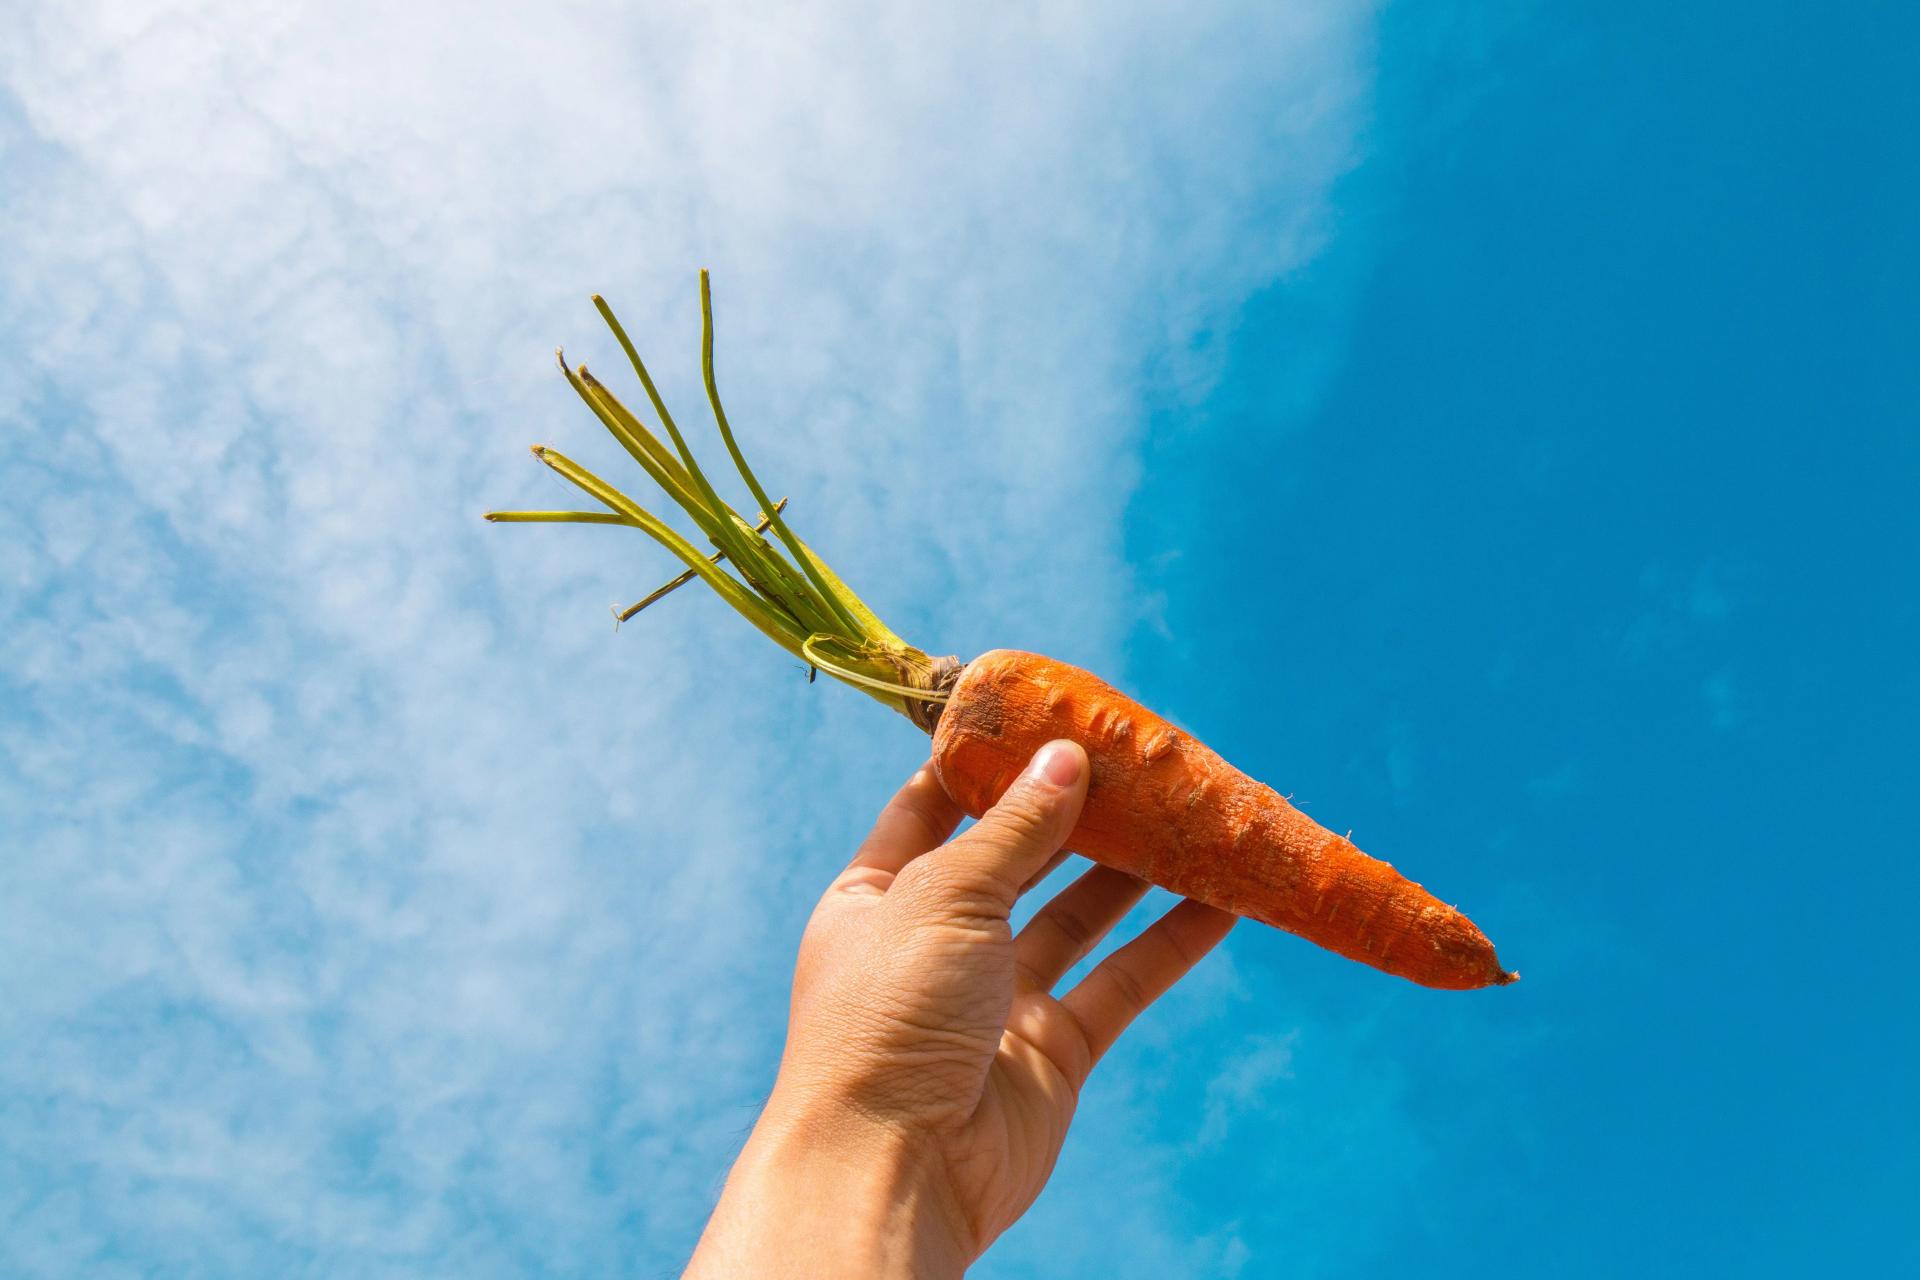 Holding a Carrot Against the Sky